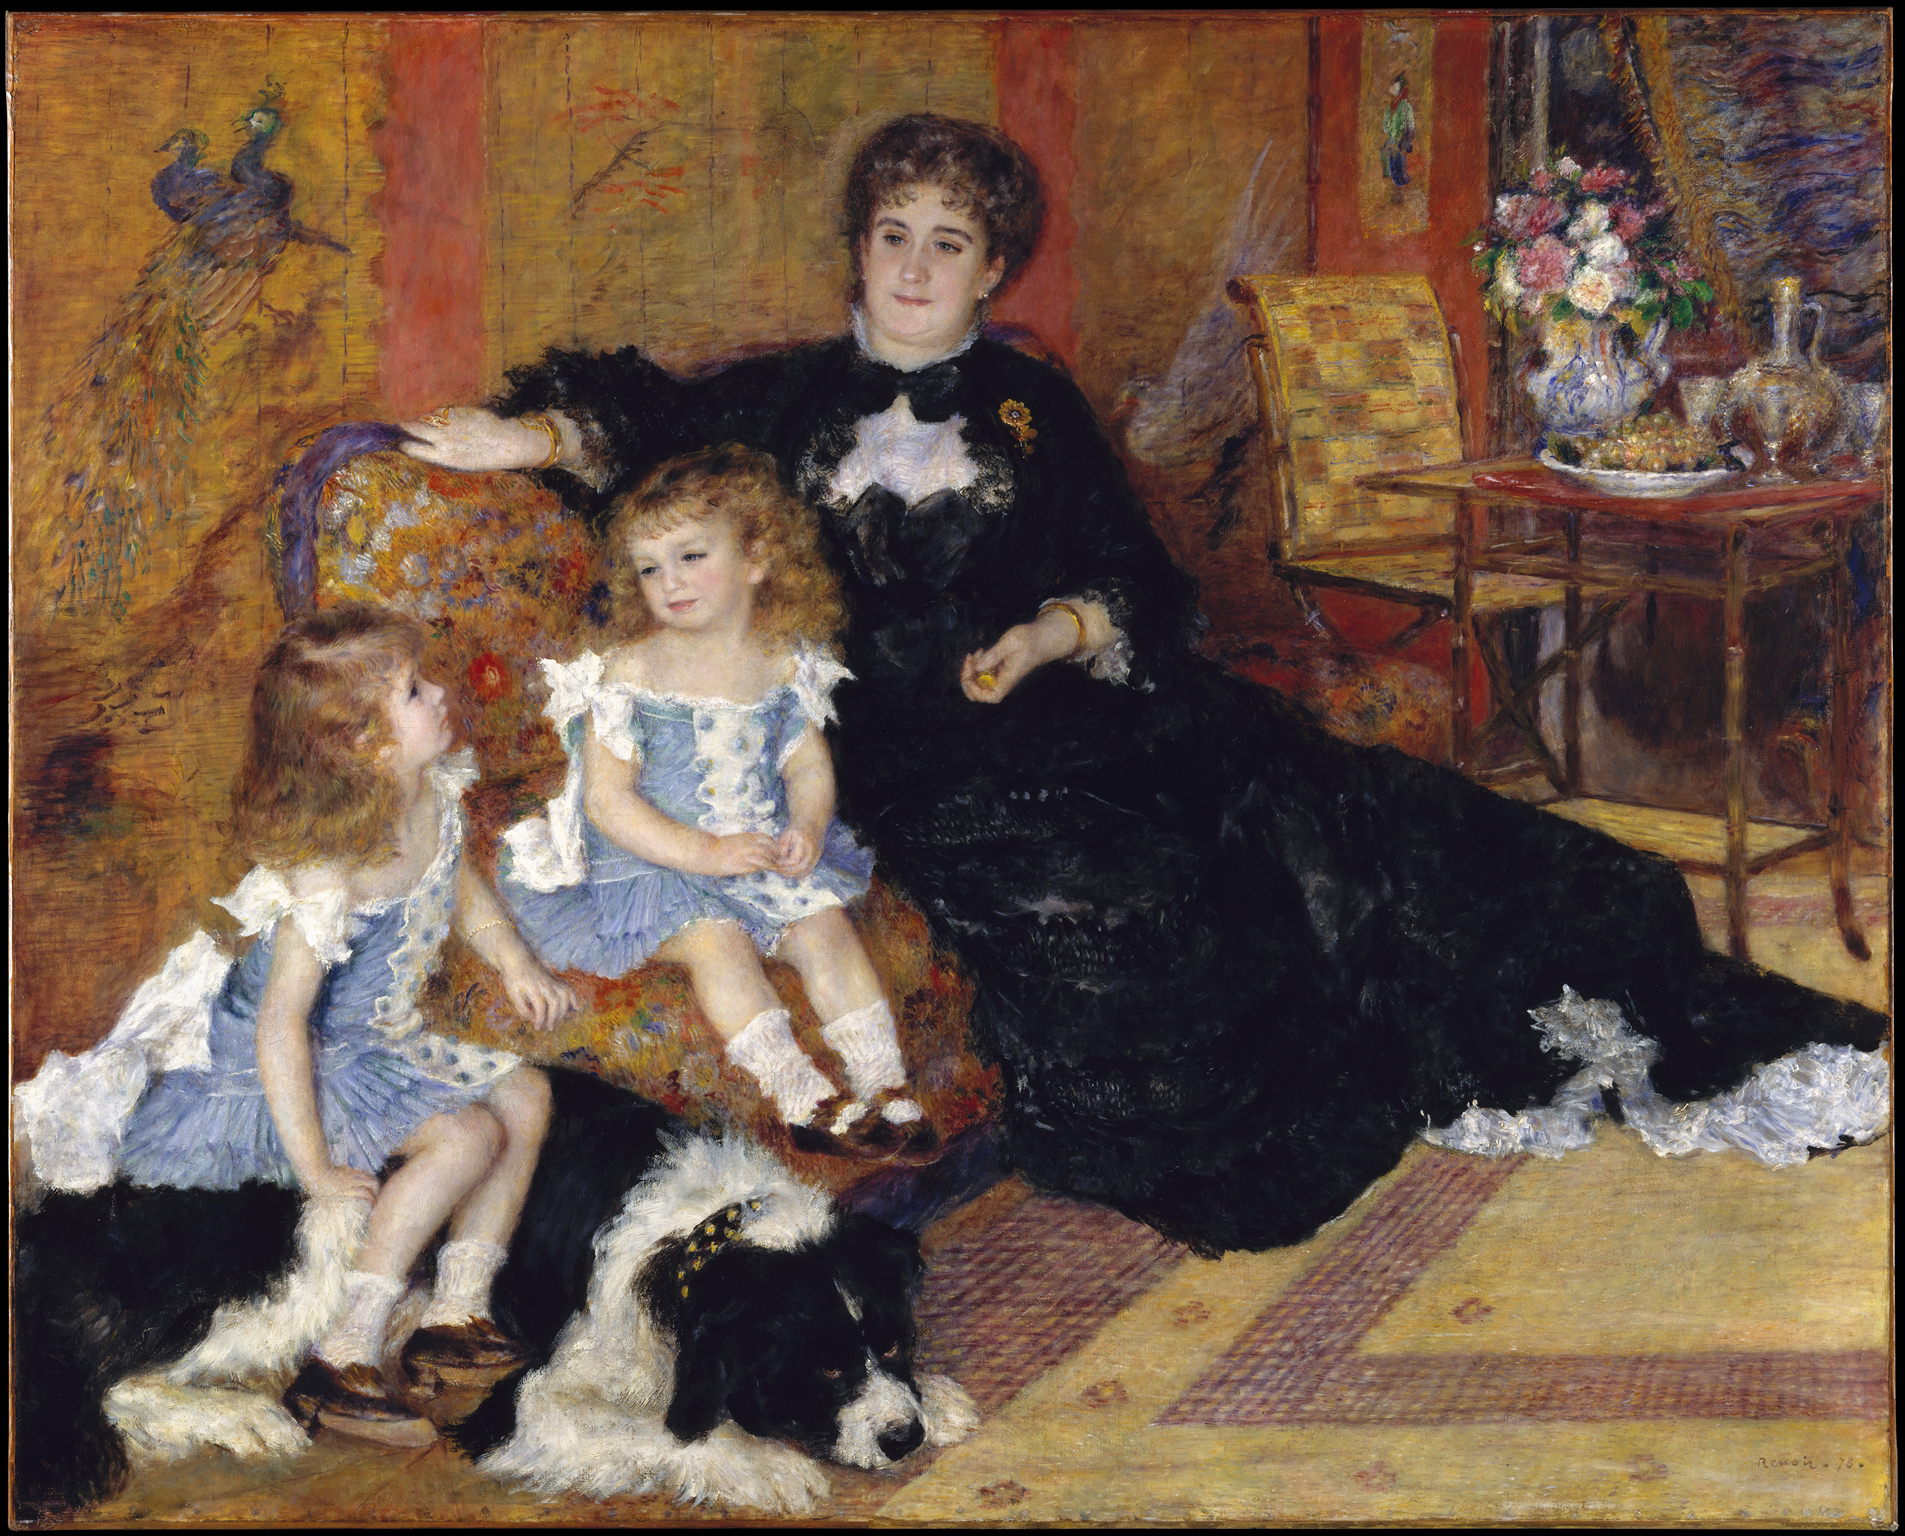 A painting depicting a woman in a black dress sitting on a sofa and looking over two young girls. The young girls wear blue dresses, and one sits on top of a black and white dog. Behind the woman is a table with flowers and food on it.